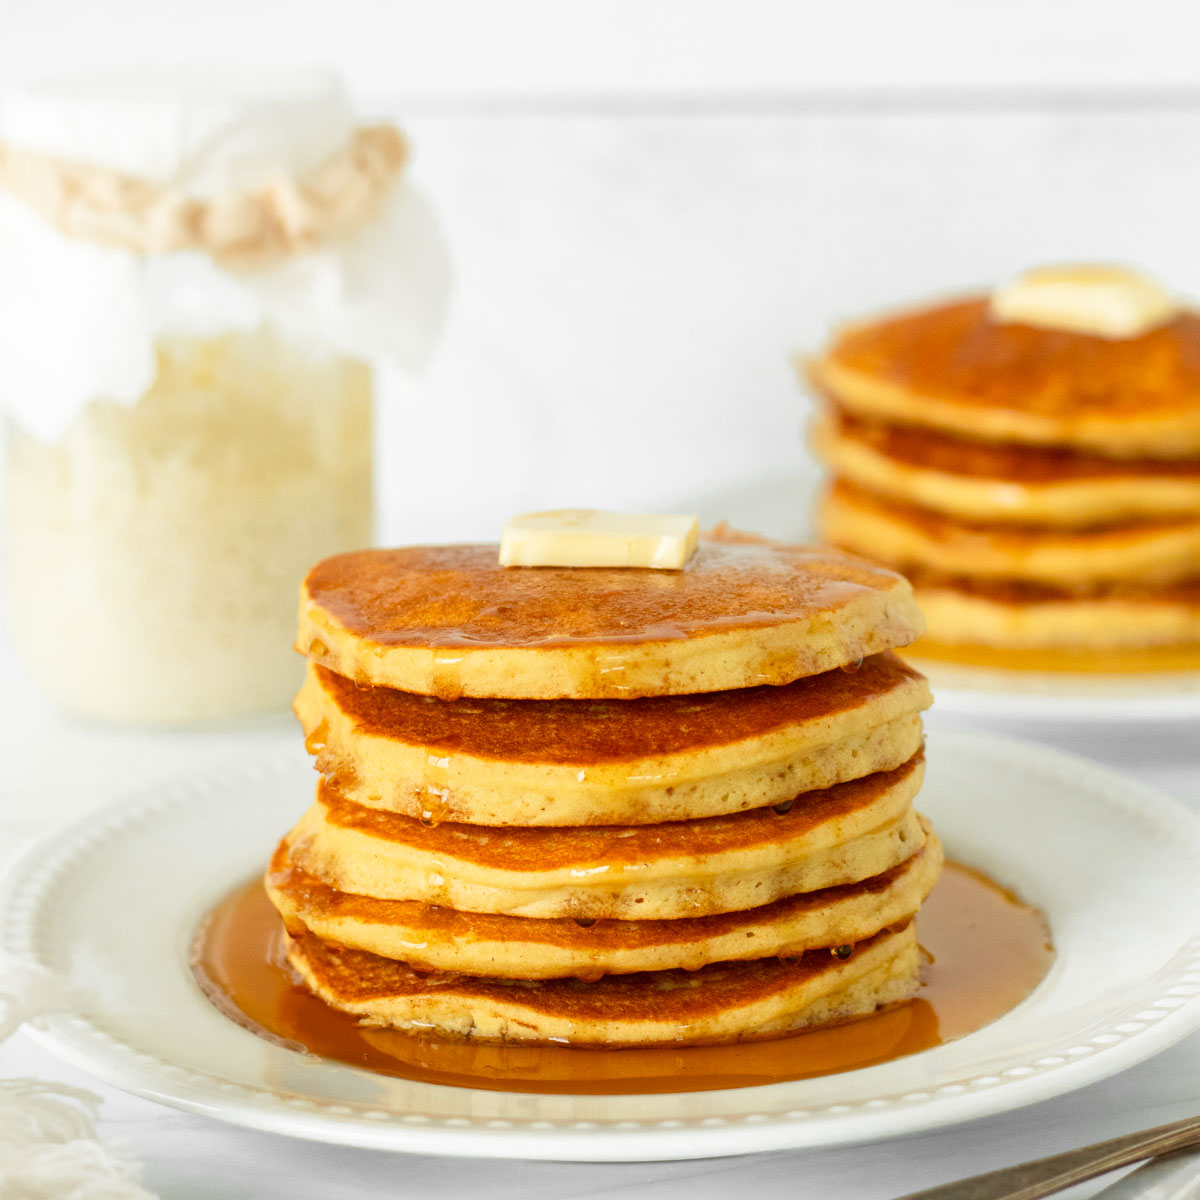 These gluten-free sourdough pancakes are an easy gluten-free sourdough recipe made with simple ingredients and sourdough discard. This is a quick breakfast recipe perfect for both a weekday and weekend breakfast.